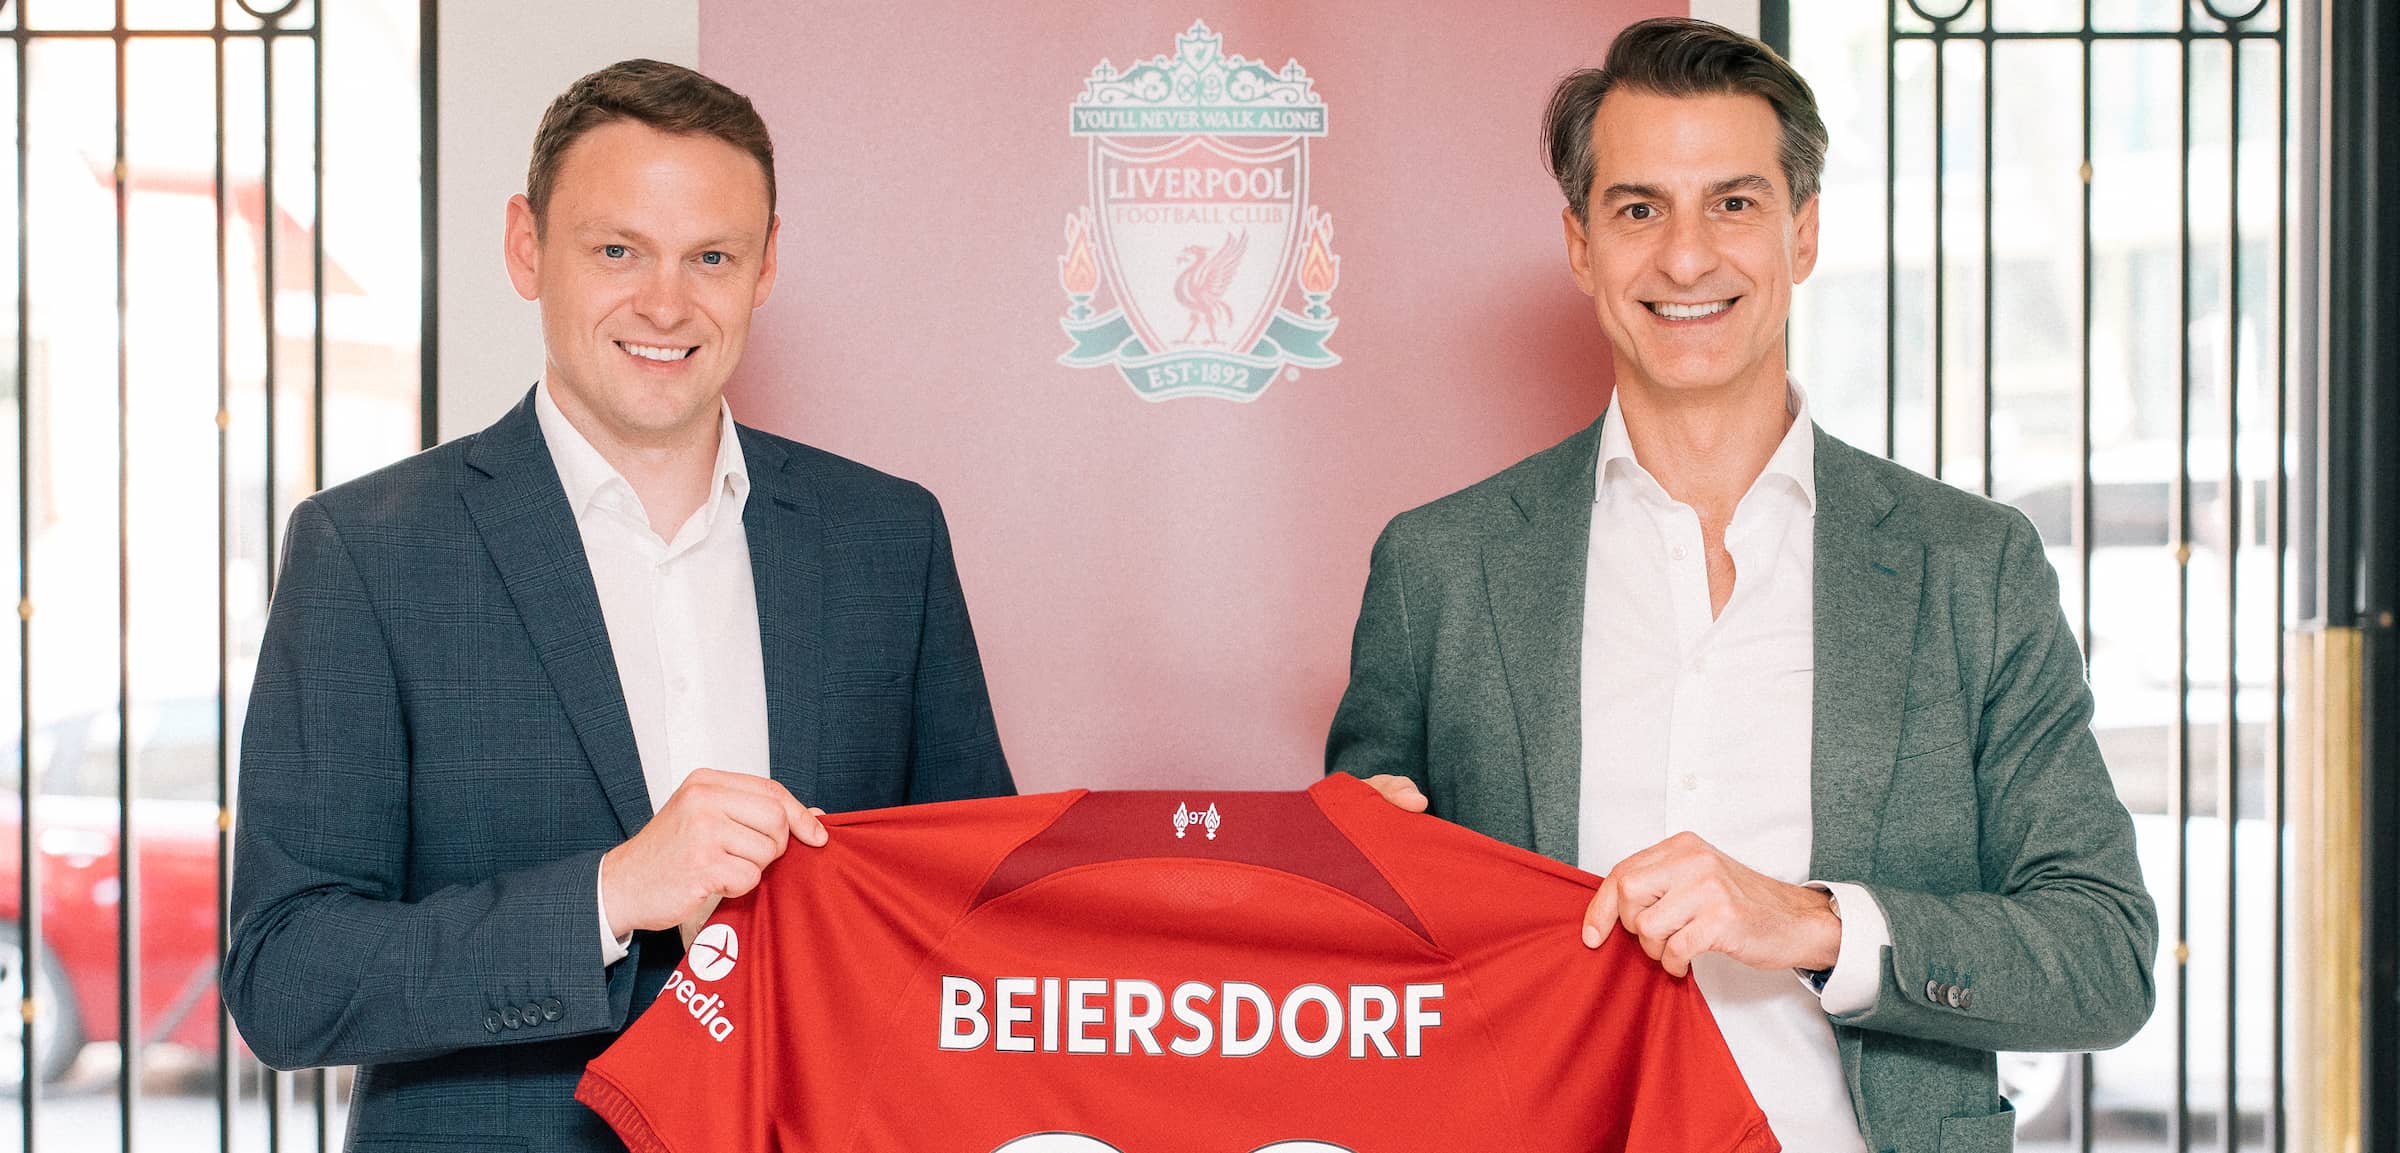 Ben latty, liverpool fc commercial director and oswald barckhahn, member of the executive board beiersdorf